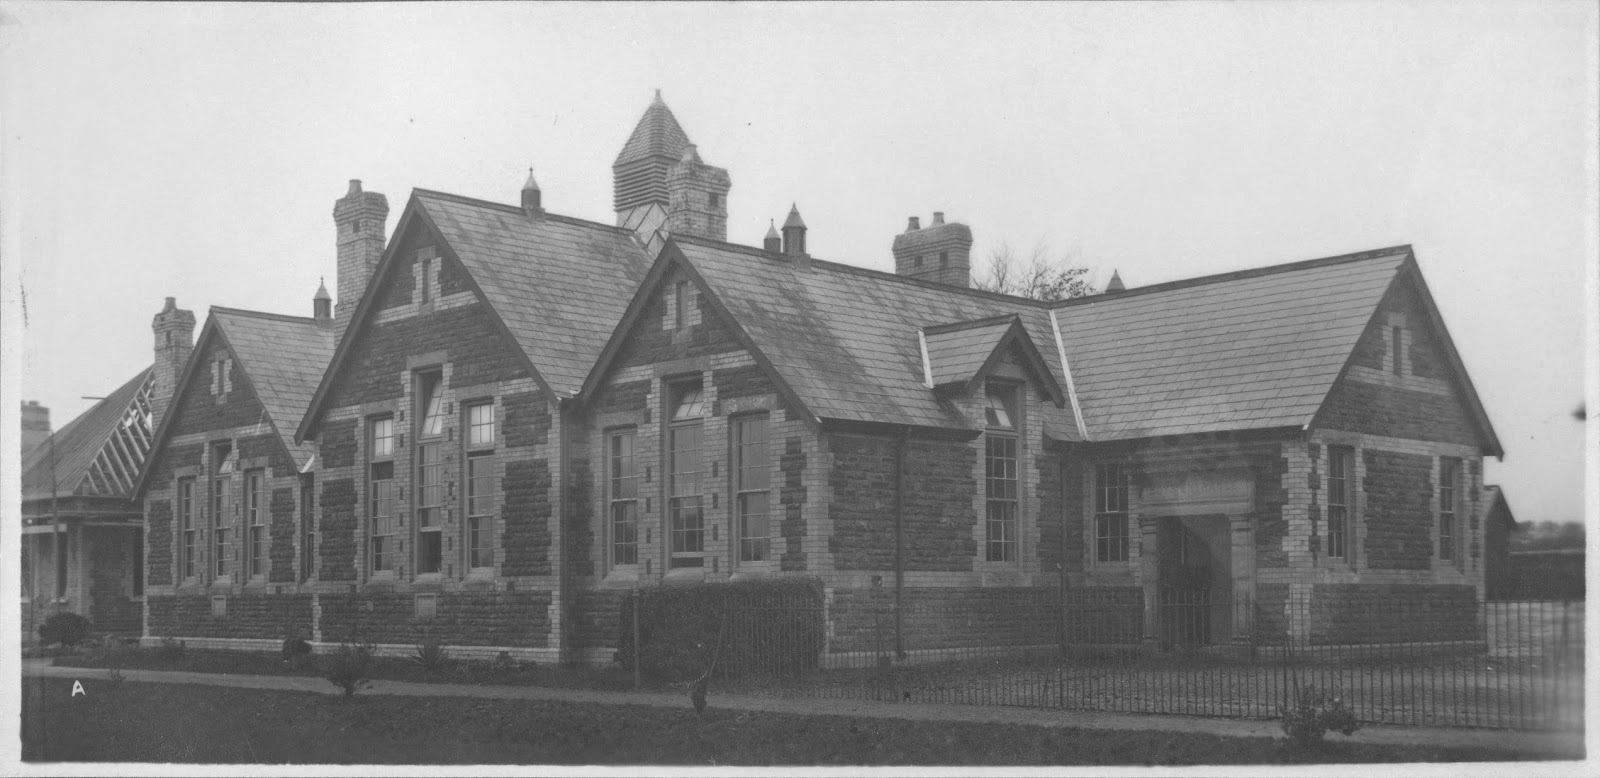 Whitland Grammar School - some historical snippets: County School 1930s